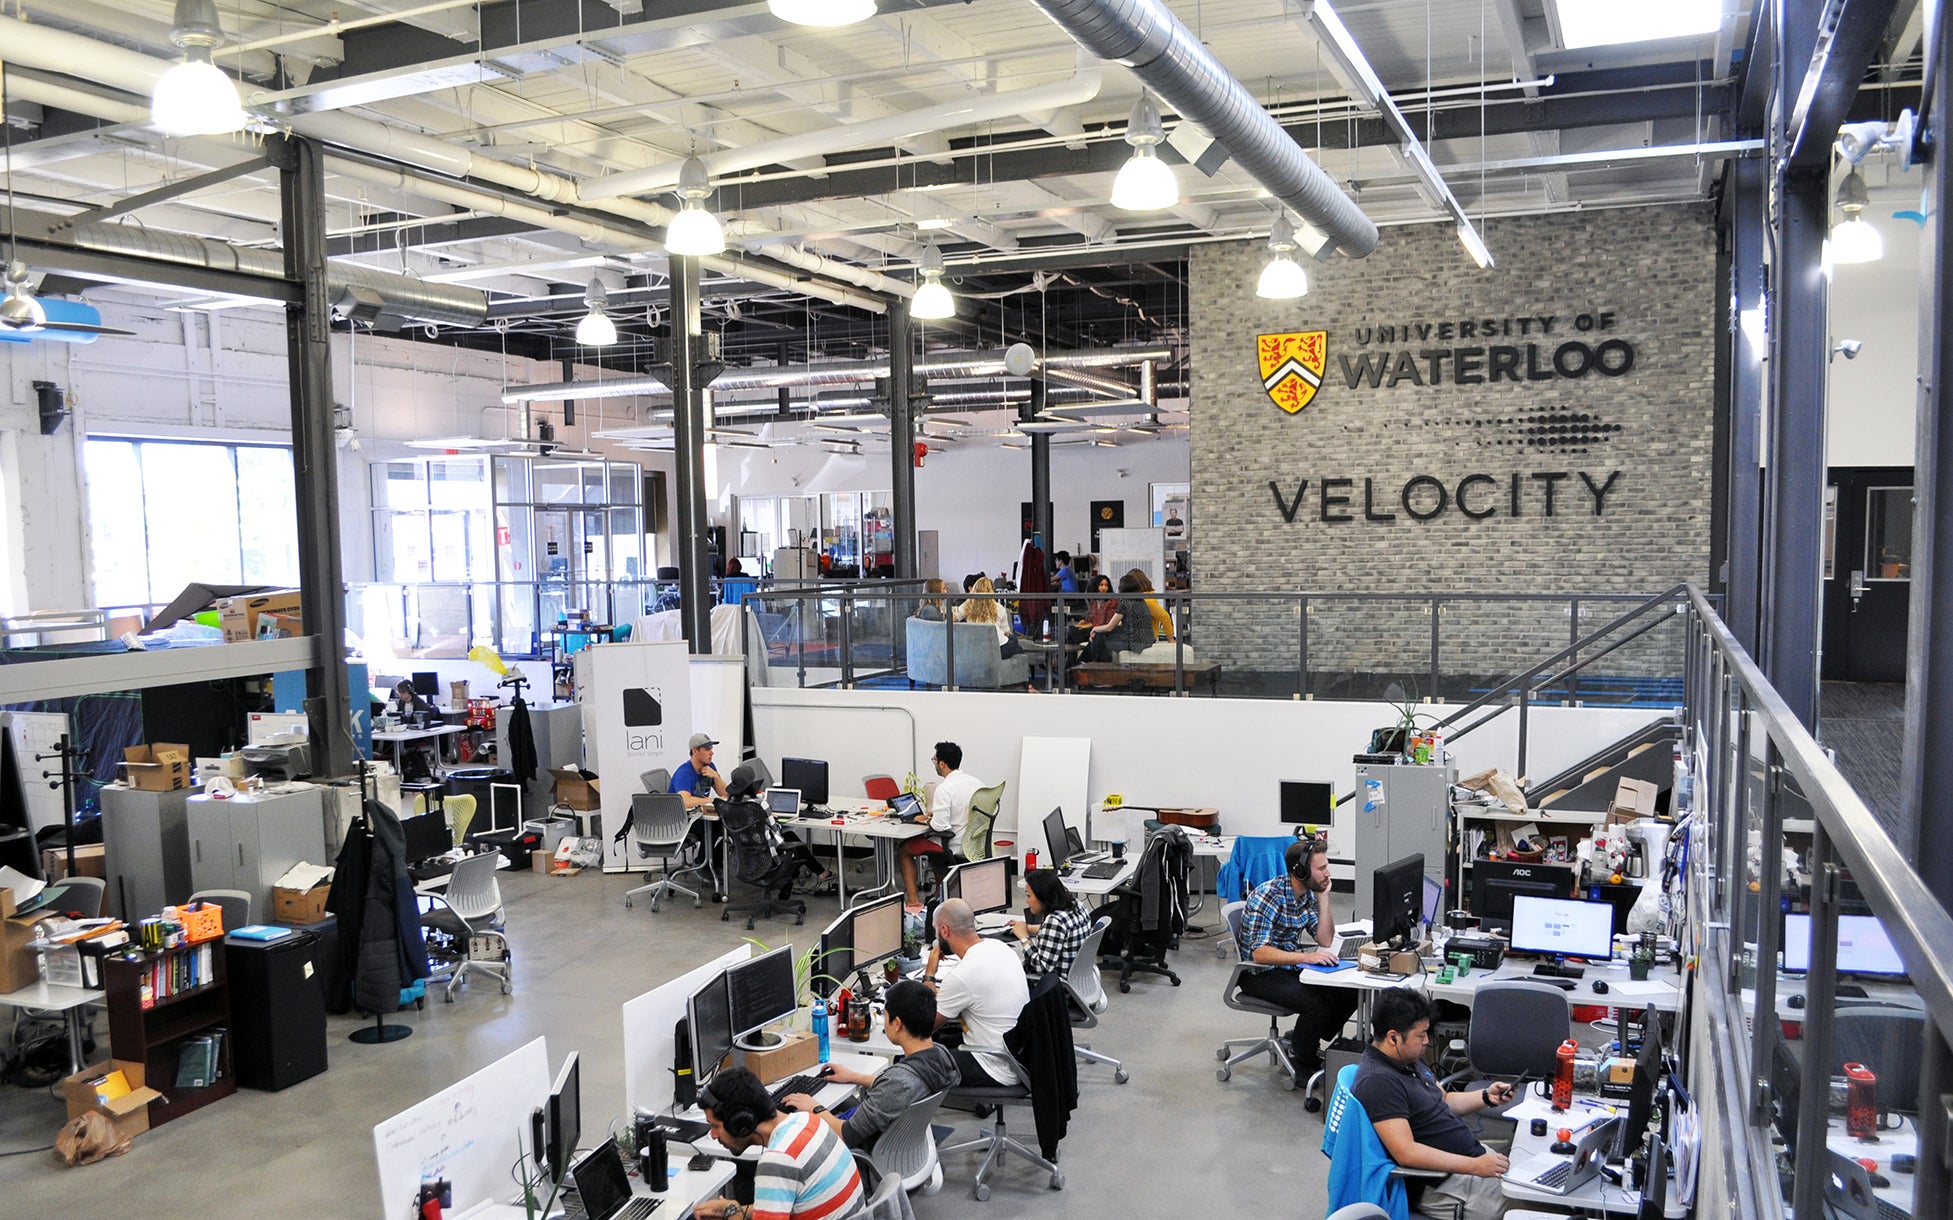 People working in the Velocity garage